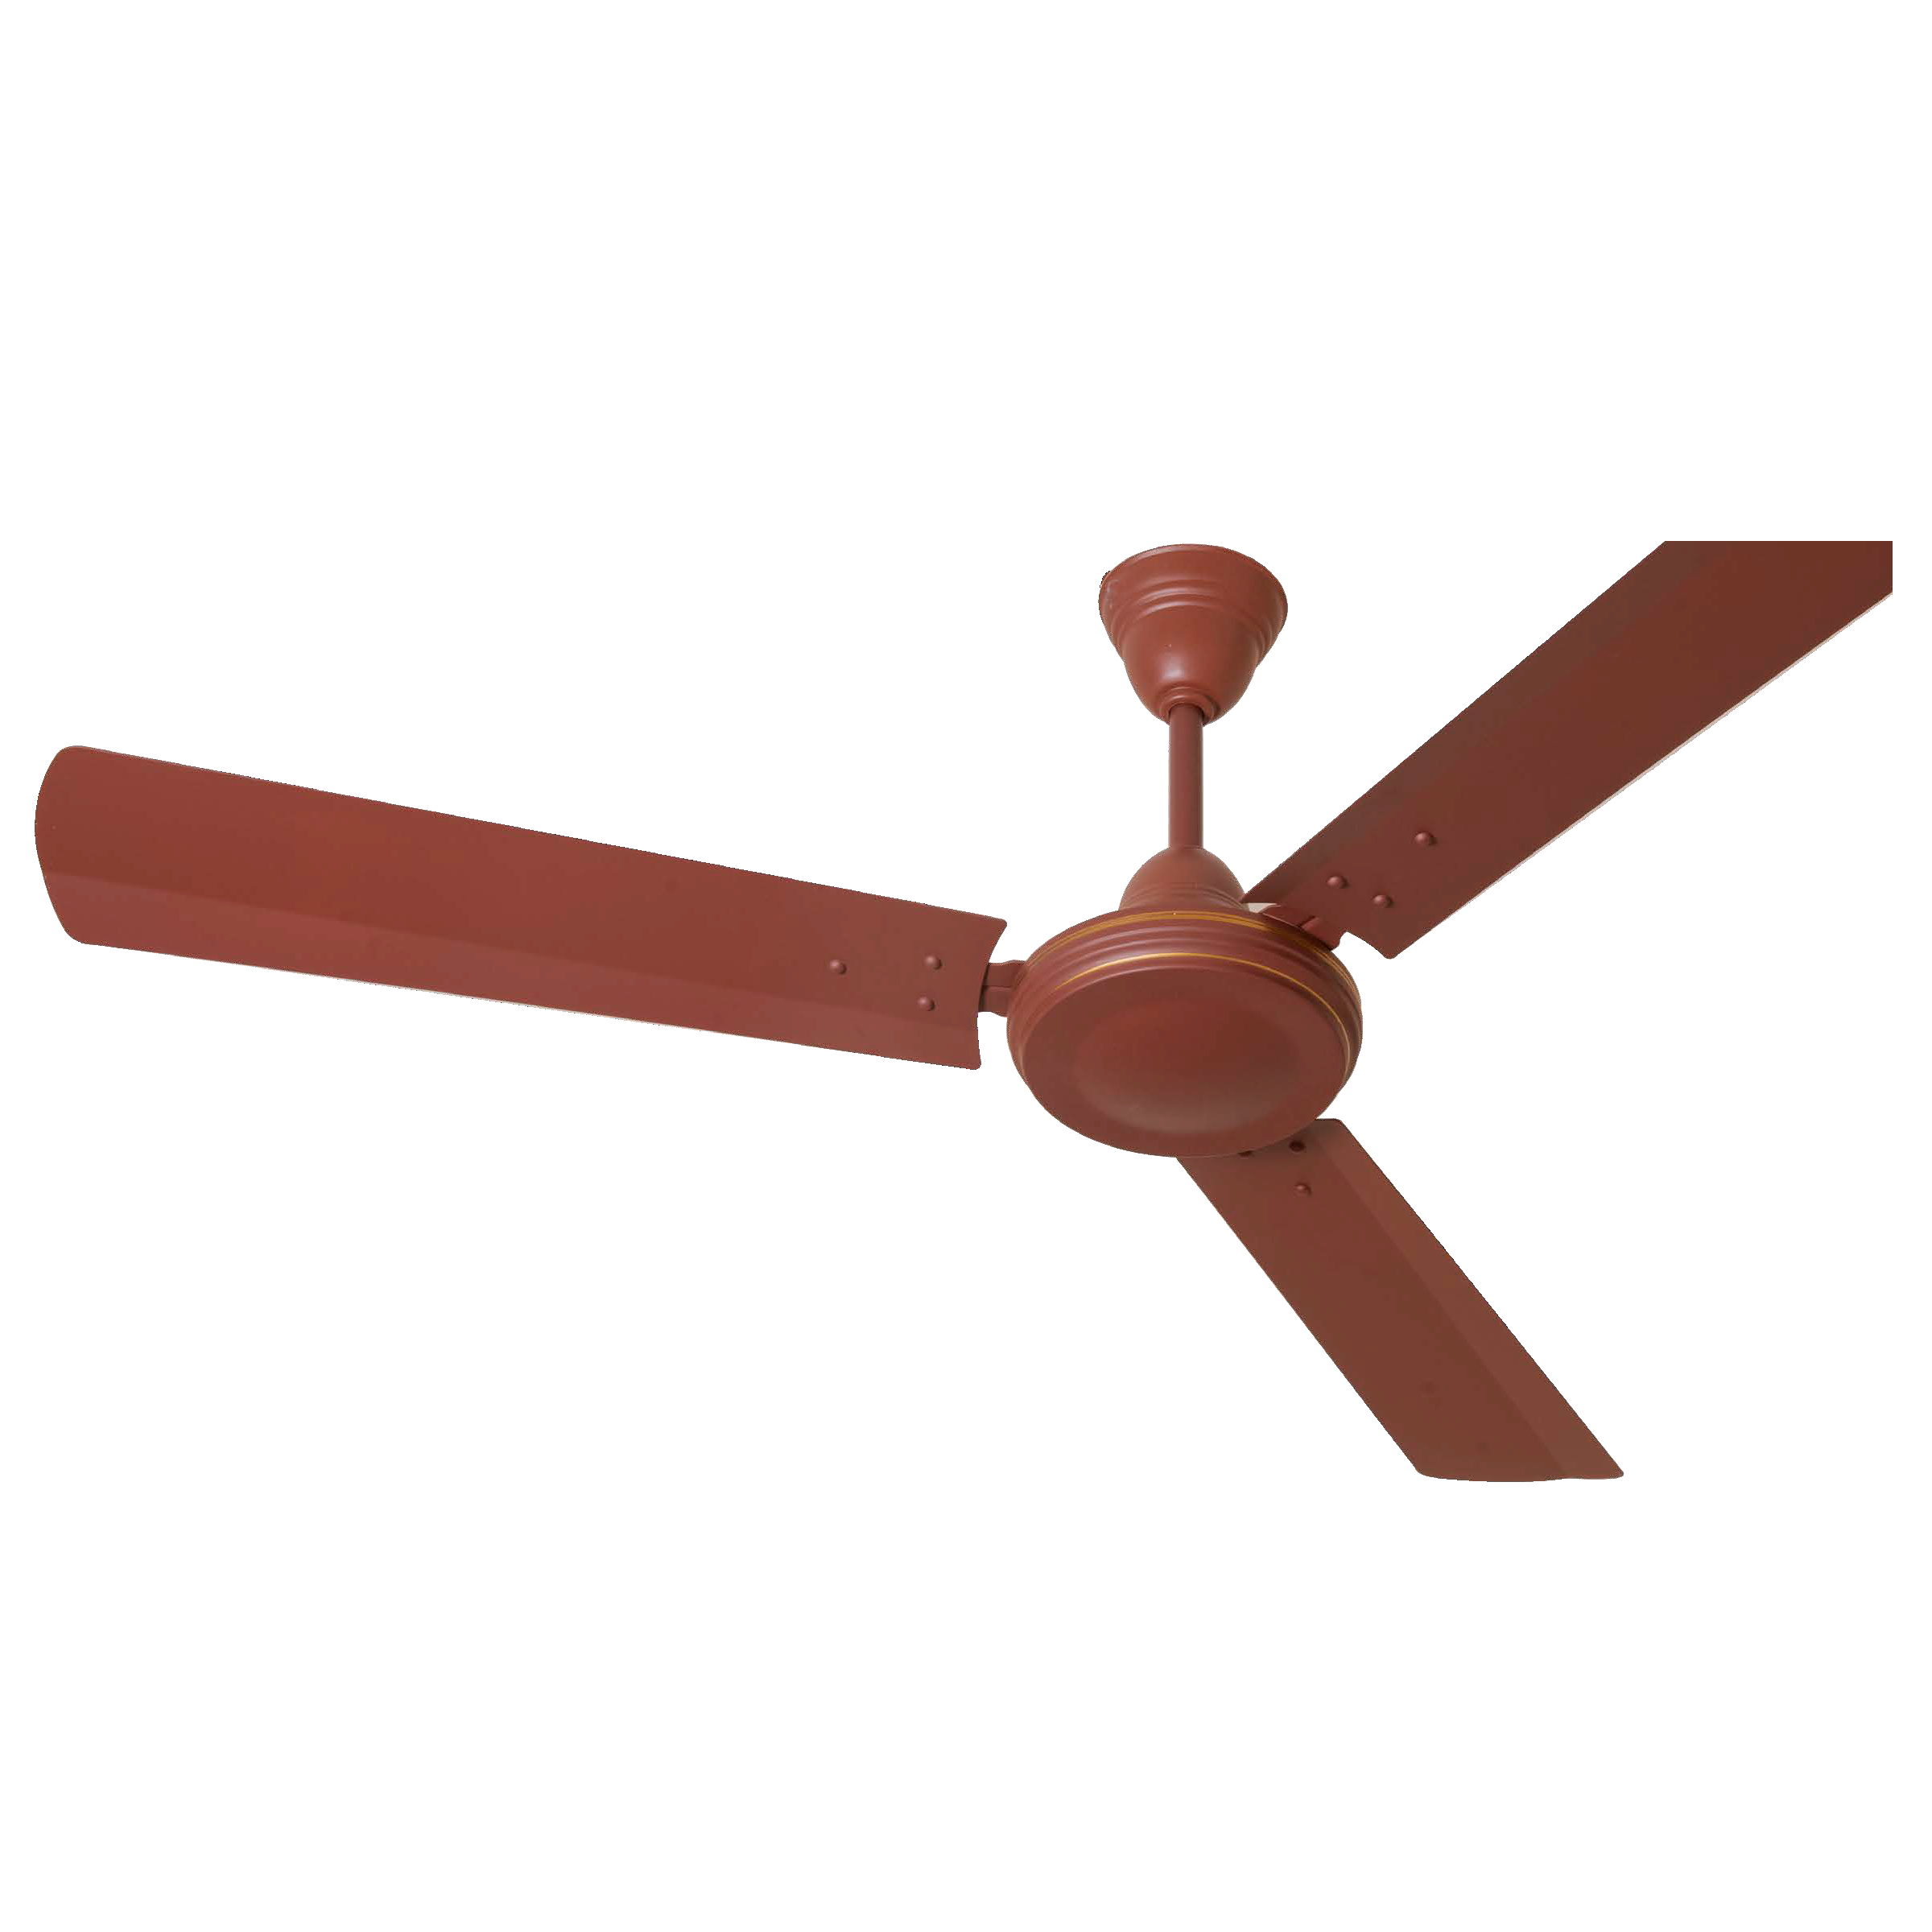 CG HS Legacy Ceiling Fan 1200mm (Pack of 2)